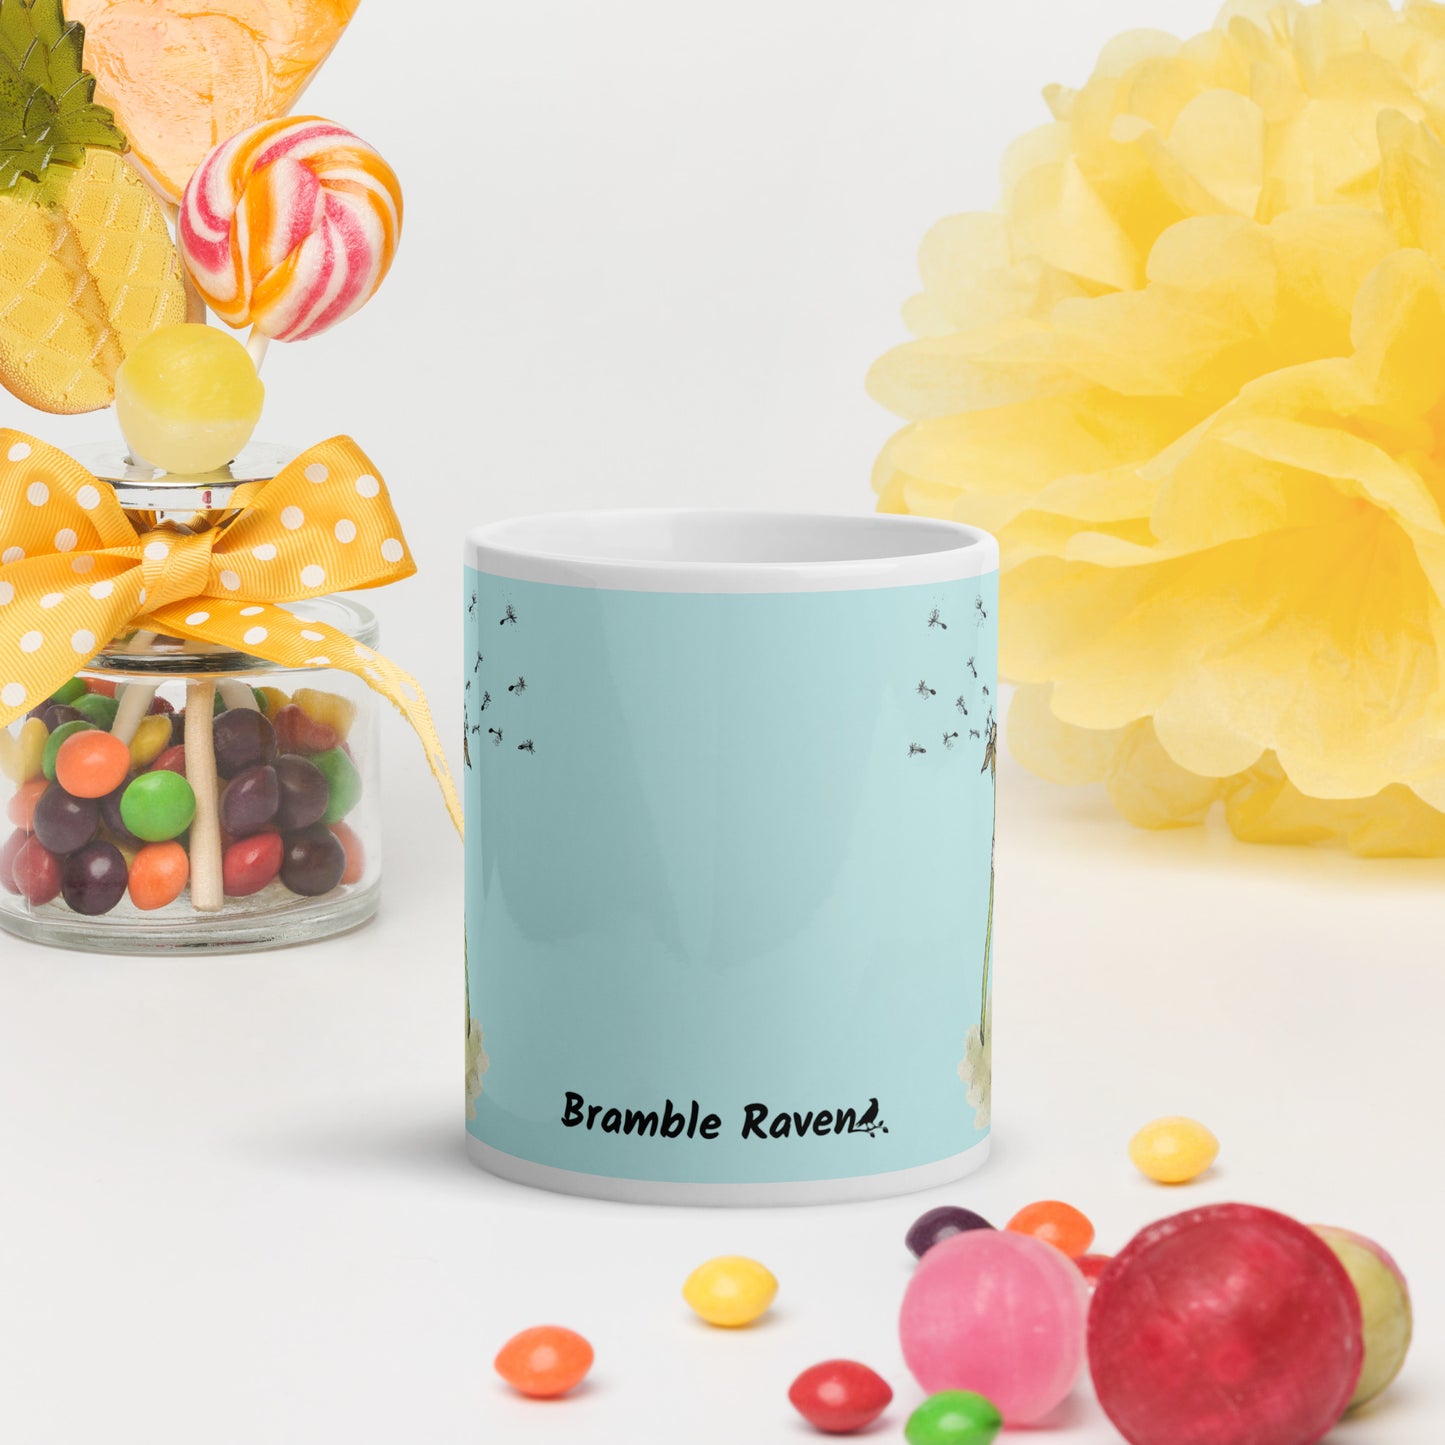 Two-sided image of original Dandelion wish design of cute watercolor mouse blowing dandelion seeds  featured on 11 ounce mug with light blue background. Front view with logo. On table with candy and decorations.